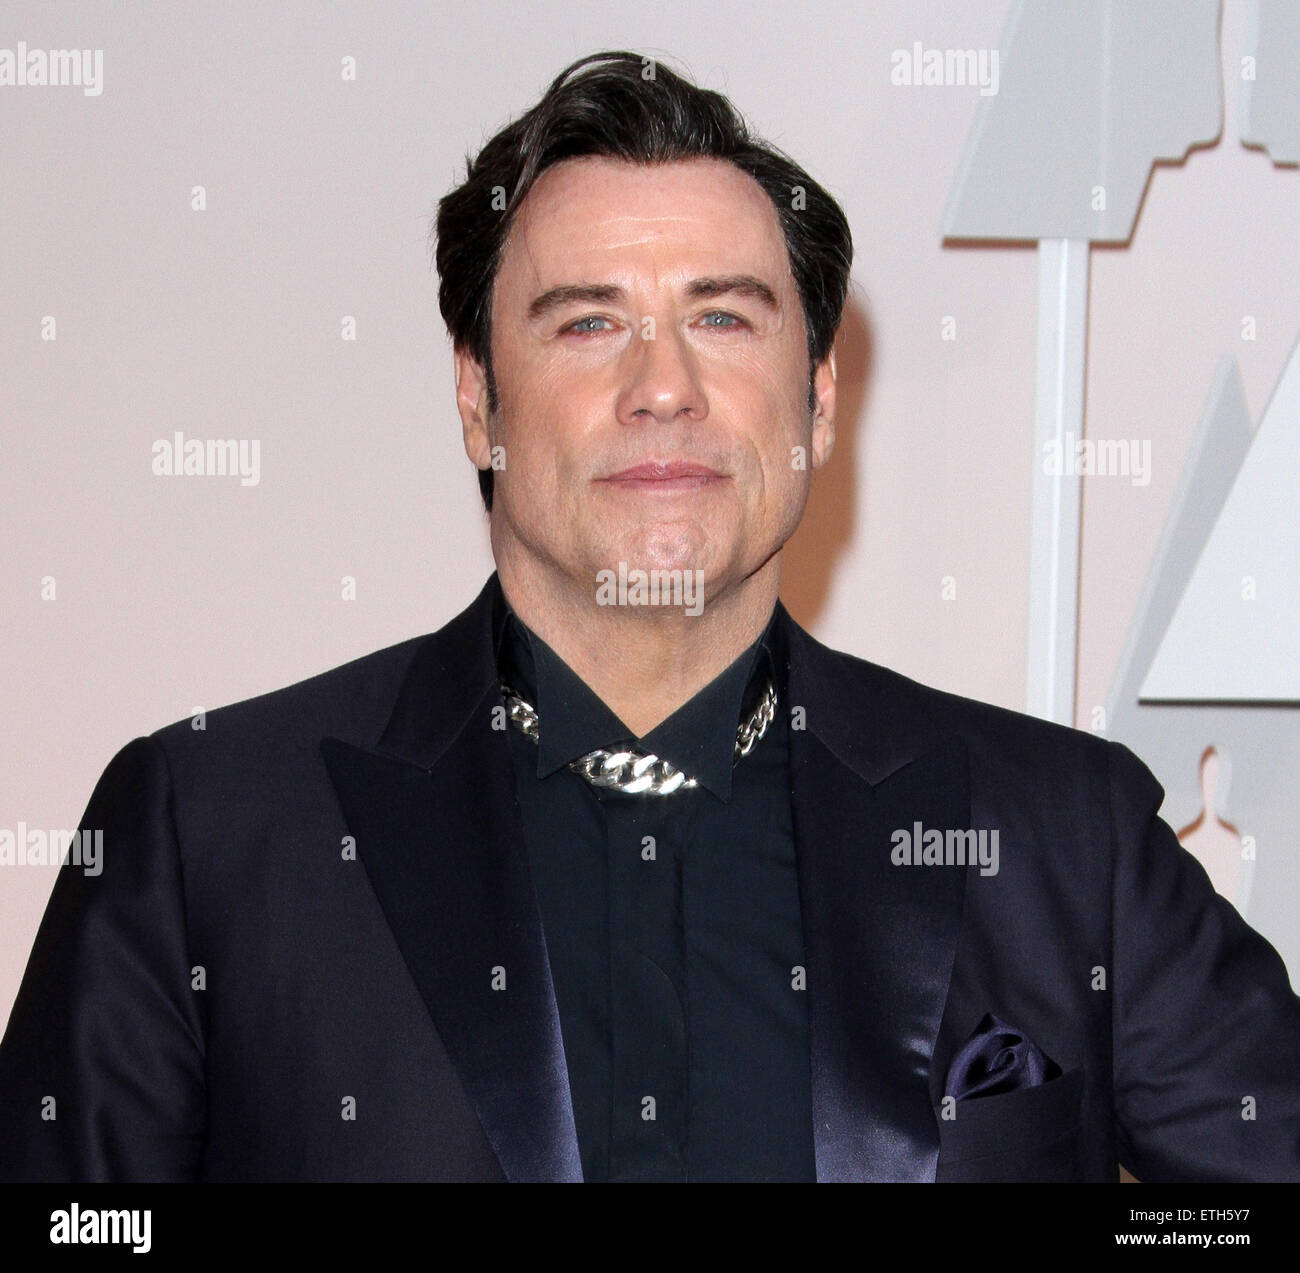 The 87th Annual Oscars held at Dolby Theatre - Red Carpet Arrivals  Featuring: John Travolta Where: Los Angeles, California, United States When: 22 Feb 2015 Credit: Adriana M. Barraza/WENN.com Stock Photo